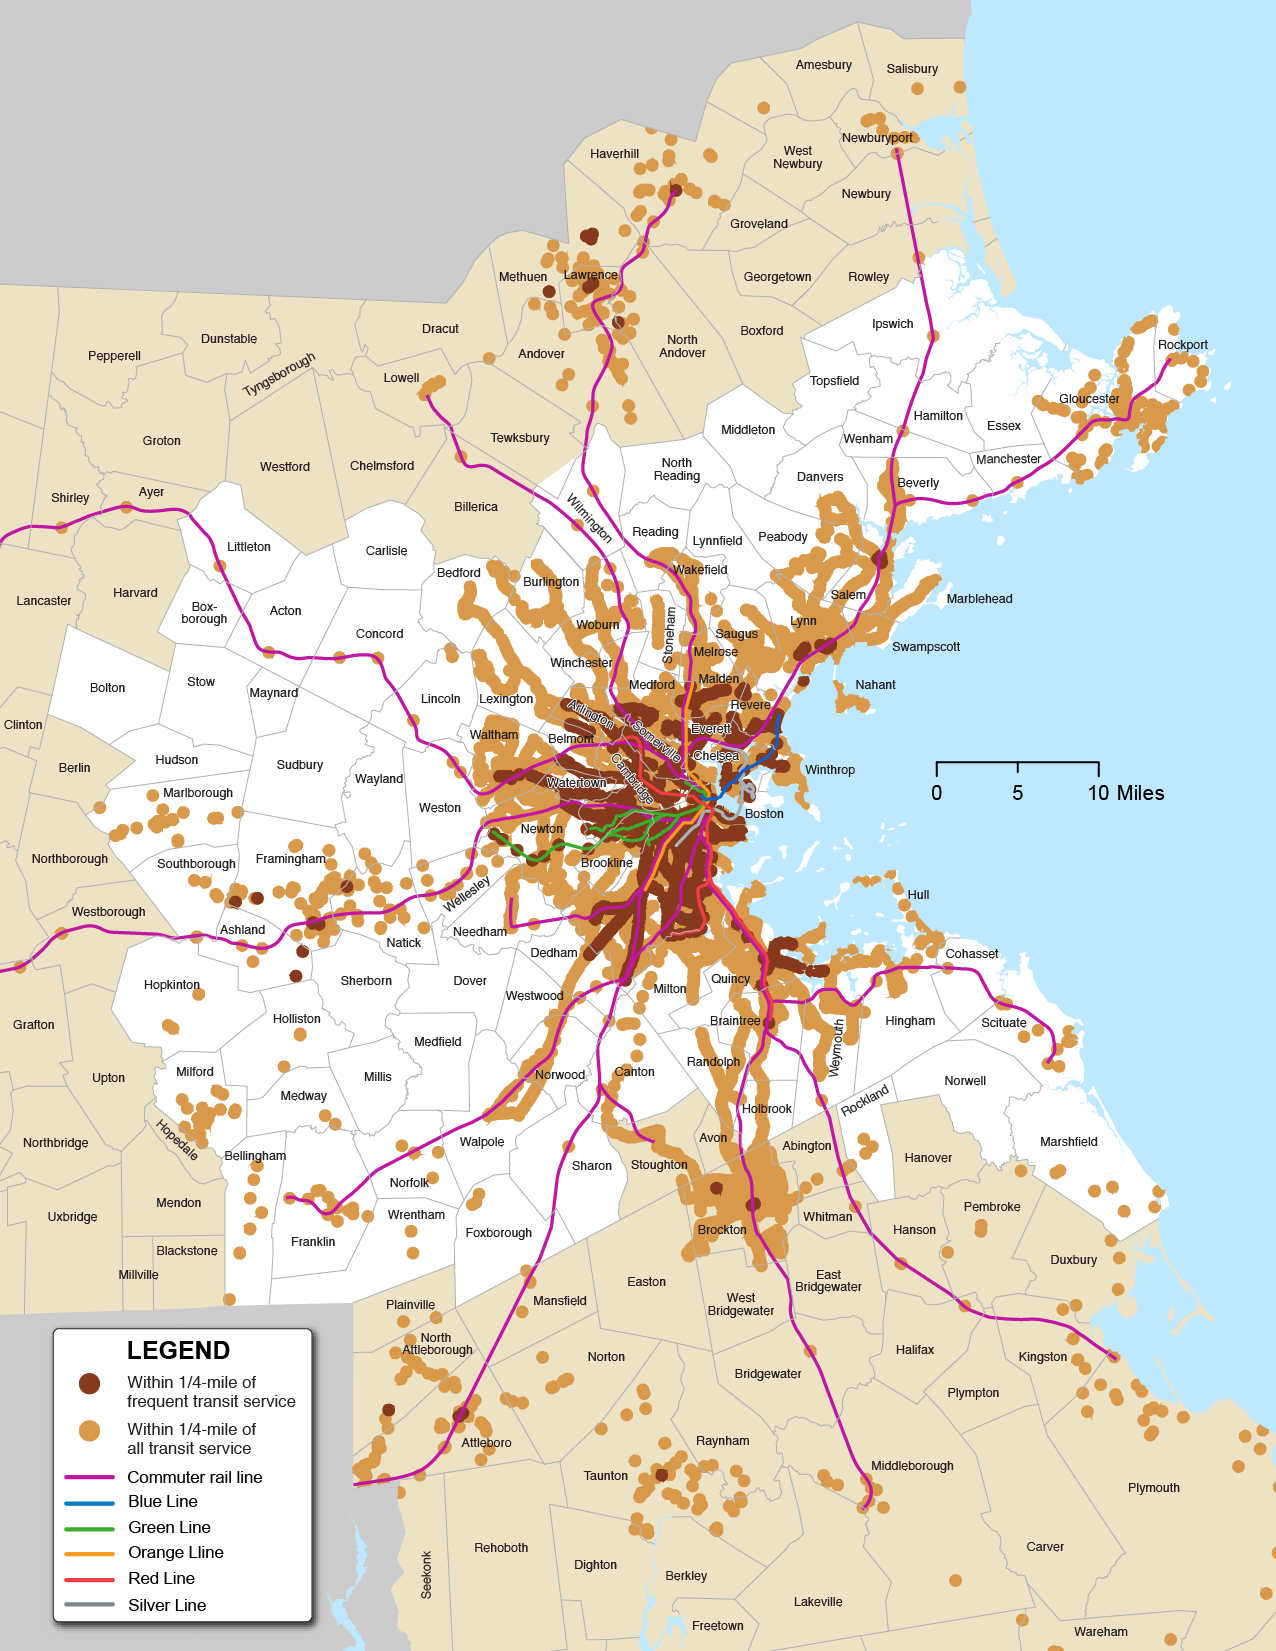 Figure 6-11 is a map of the Boston Region with MBTA Commuter Rail and Rapid Transit Lines. Figure 6-11 highlights areas within ¼ mile of frequent transit service and within ¼ mile of all-transit service in different shades. 